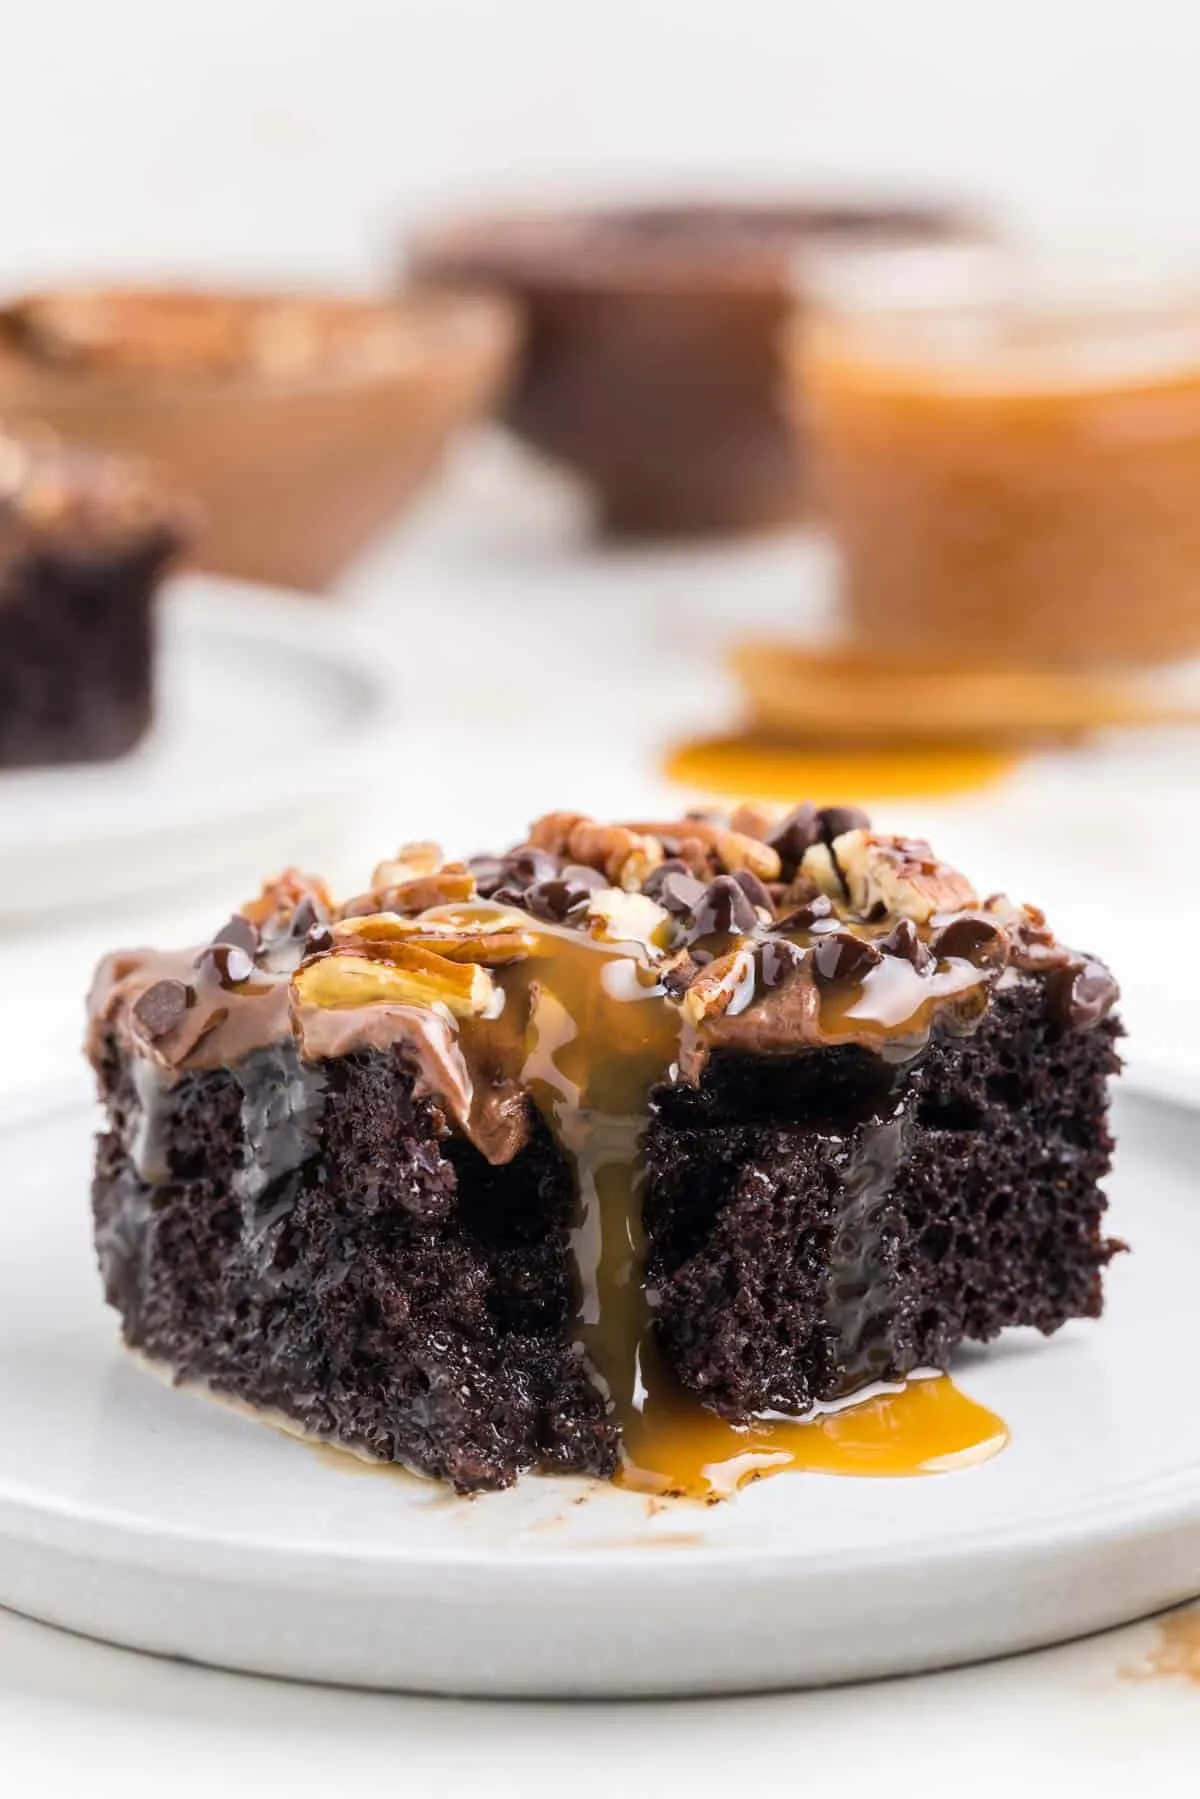 Turtle Poke Cake is a decadent chocolate cake filled with a caramel and condensed milk mixture and topped with chocolate frosting, chopped pecans and mini chocolate chips.